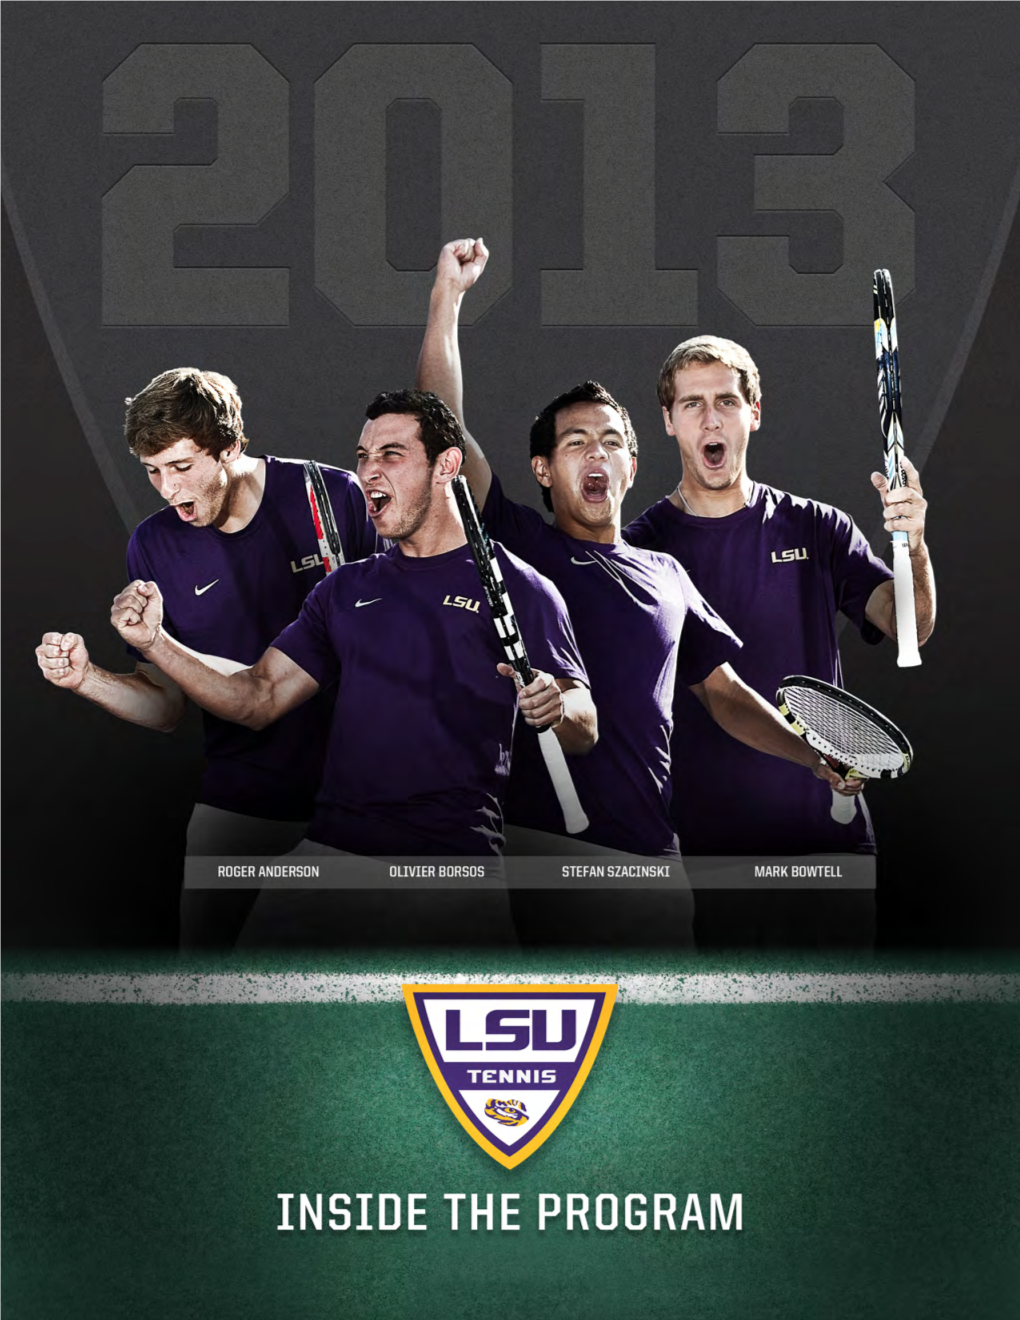 Contents Lsusports.Net/Fancage 4 2013 Schedule 24 On-Campus Living 5 SEC Champions 25 On-Campus Dining 6 W.T